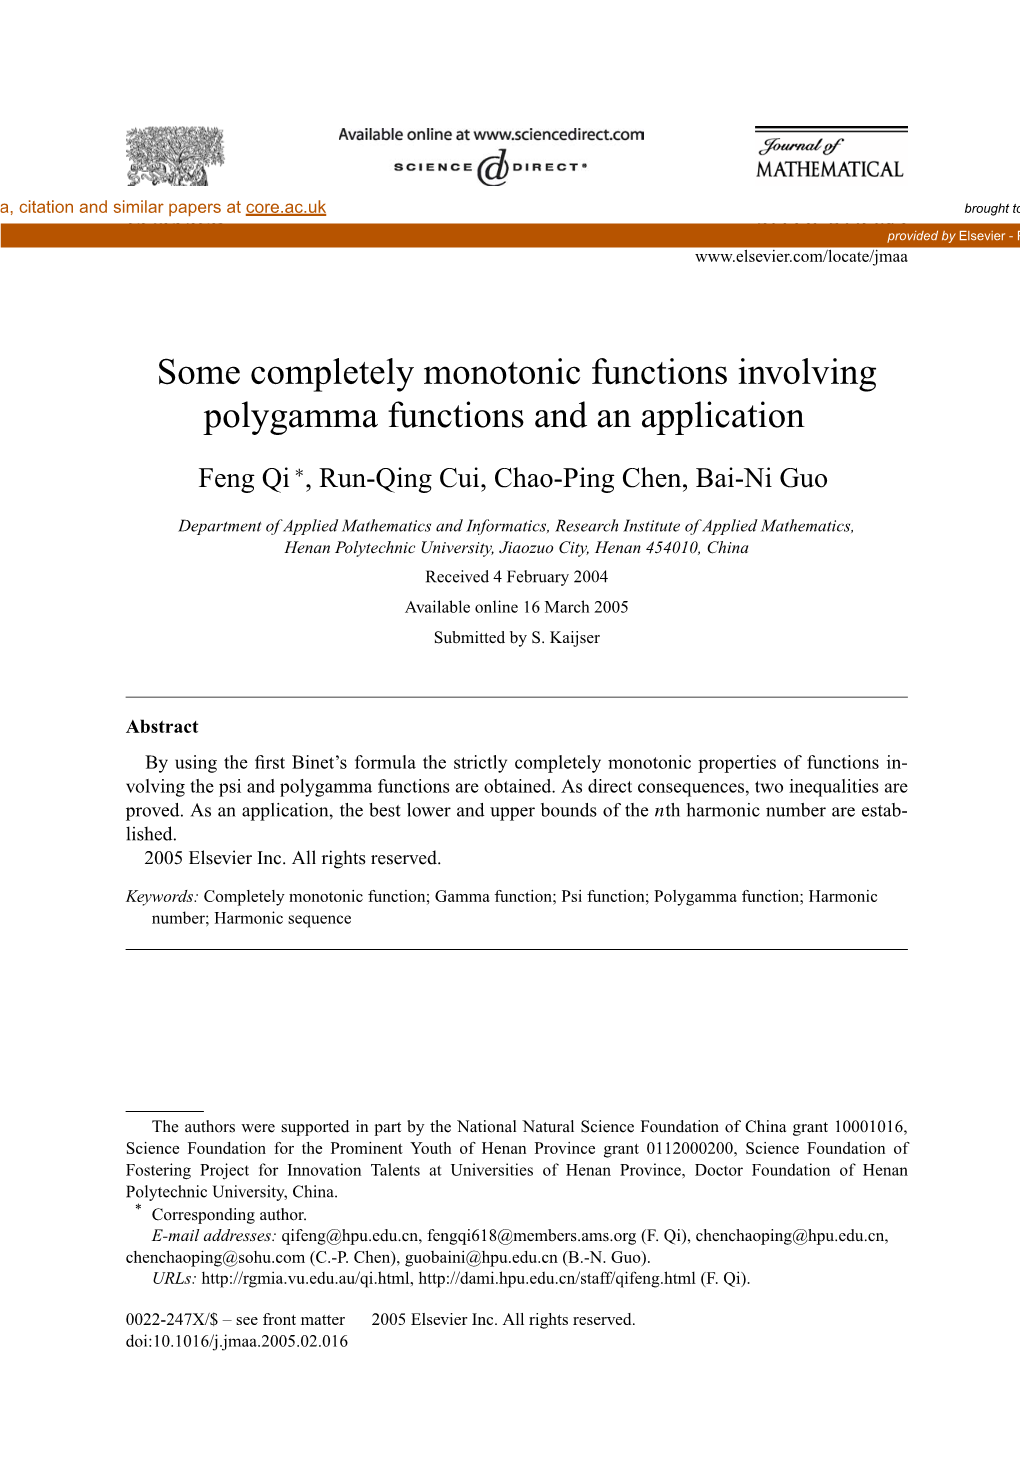 Some Completely Monotonic Functions Involving Polygamma Functions and an Application ✩